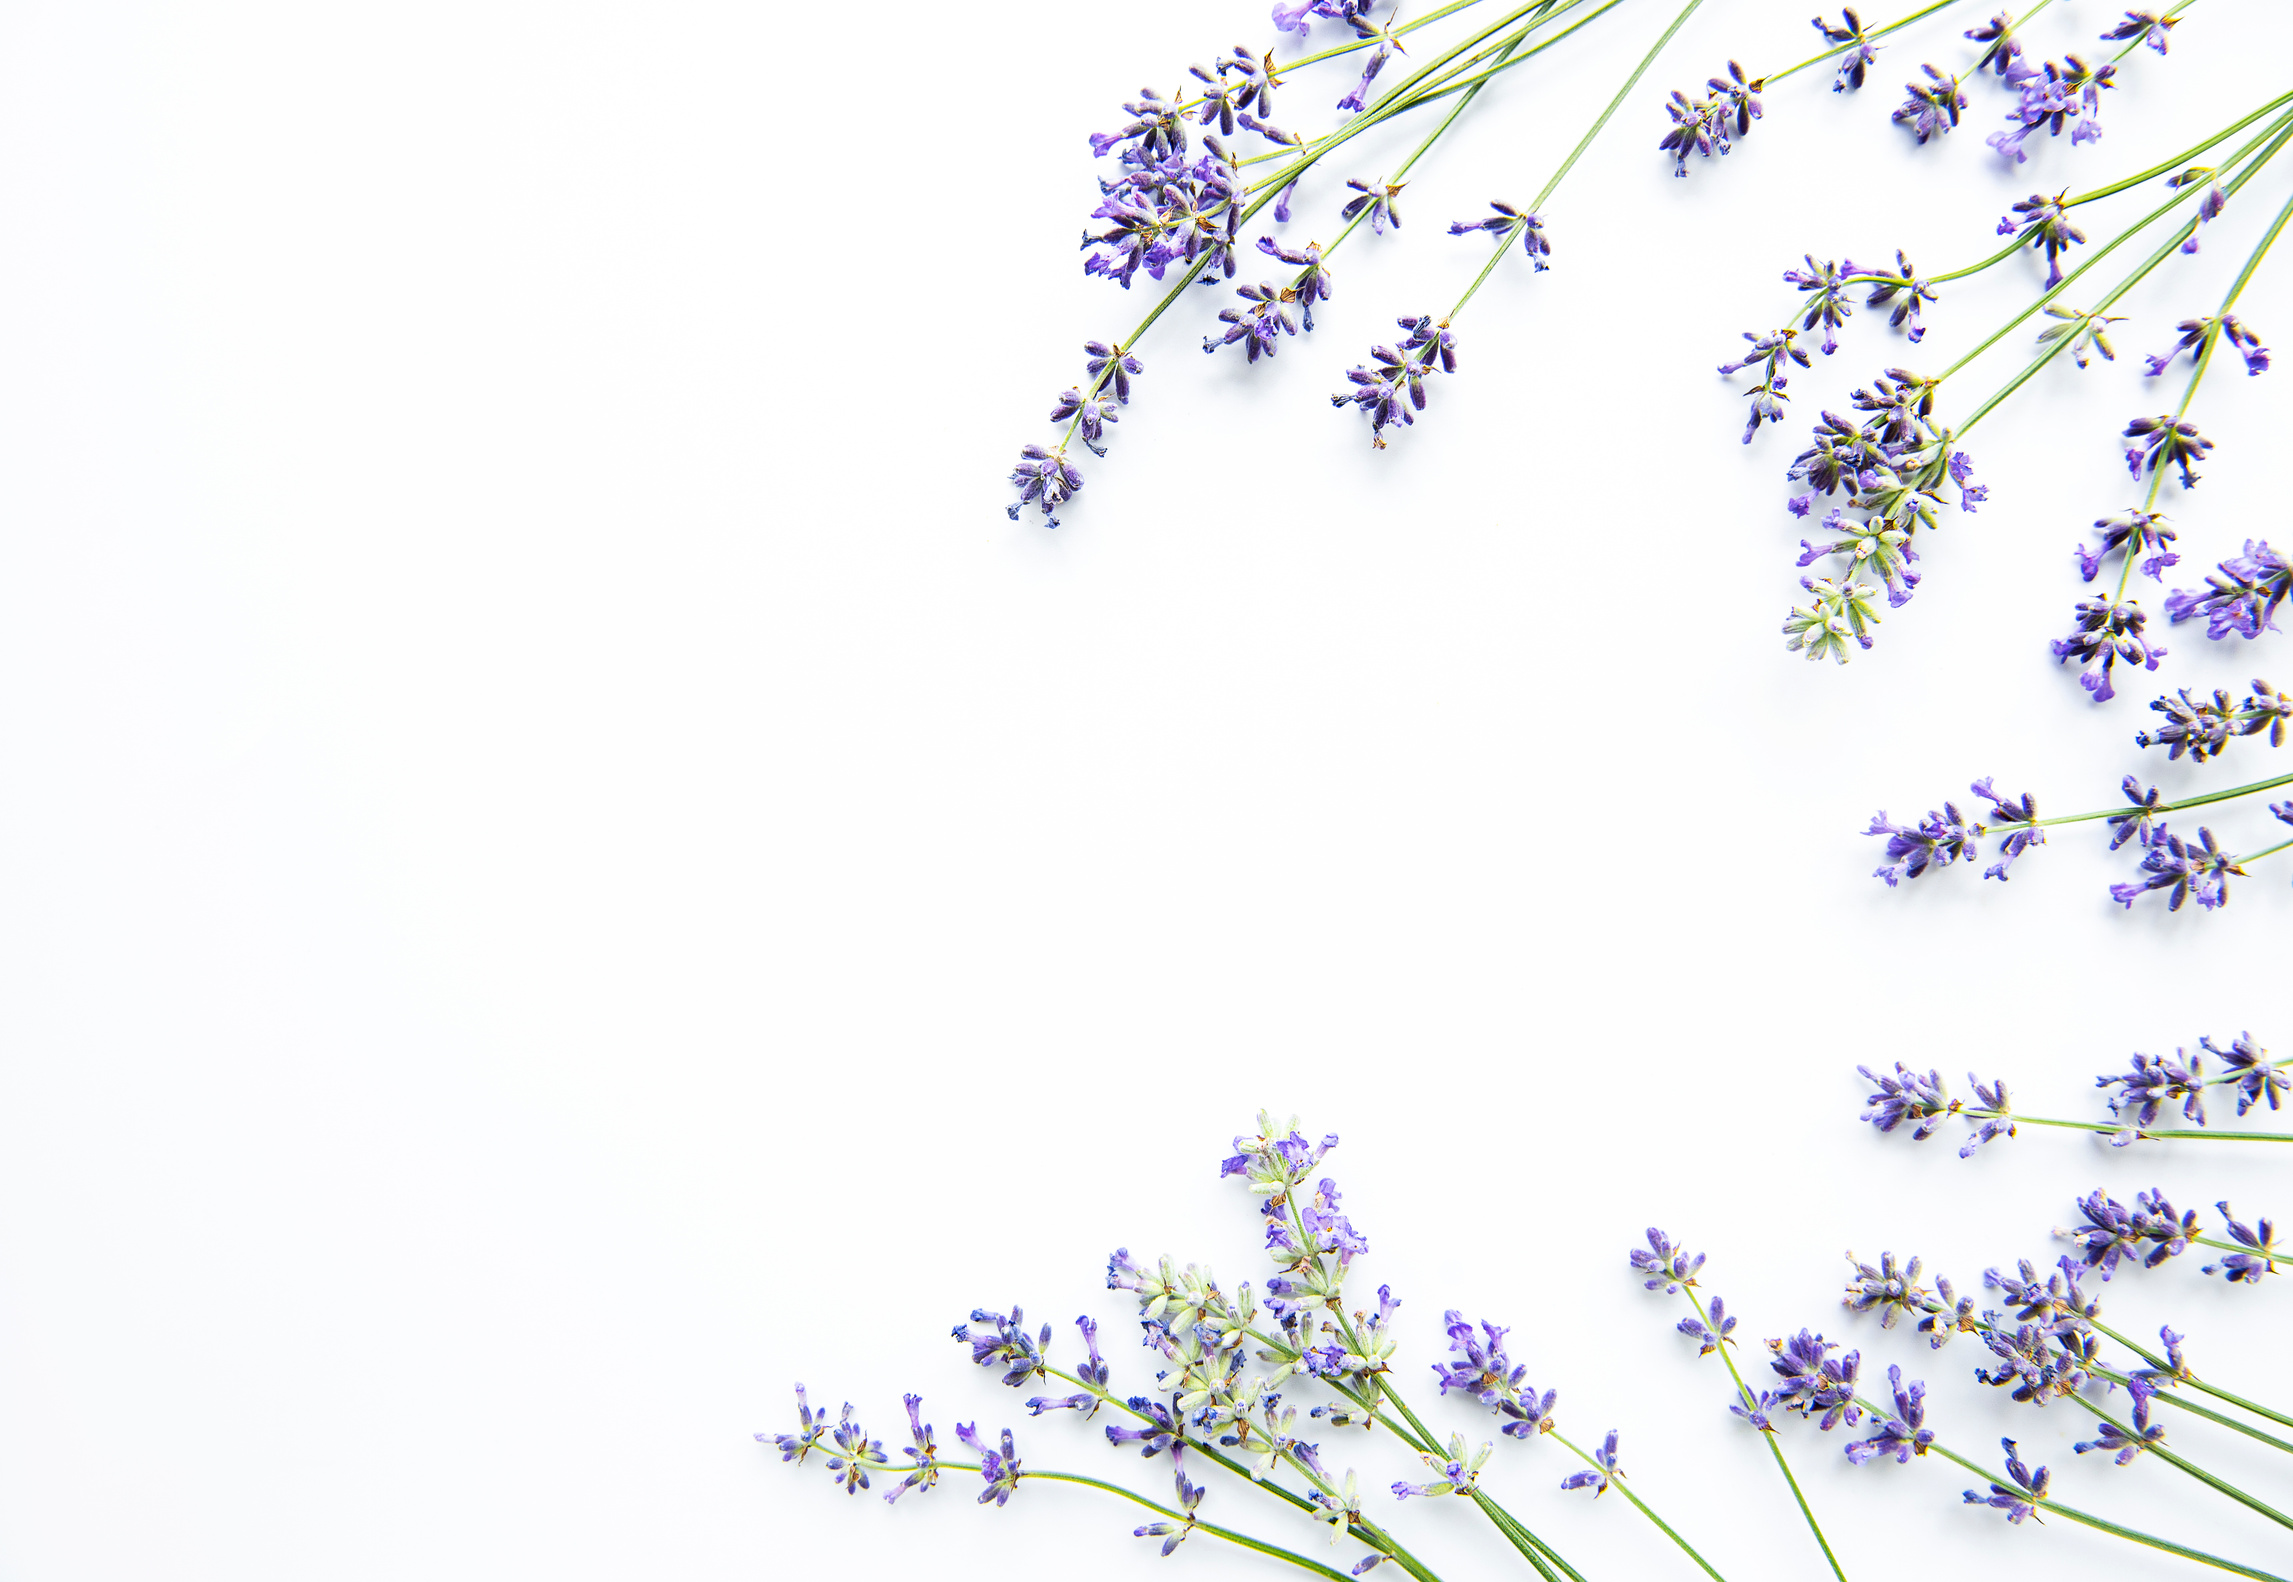 Lavender Flowers on White Background. Flowers Flat Lay, Top View